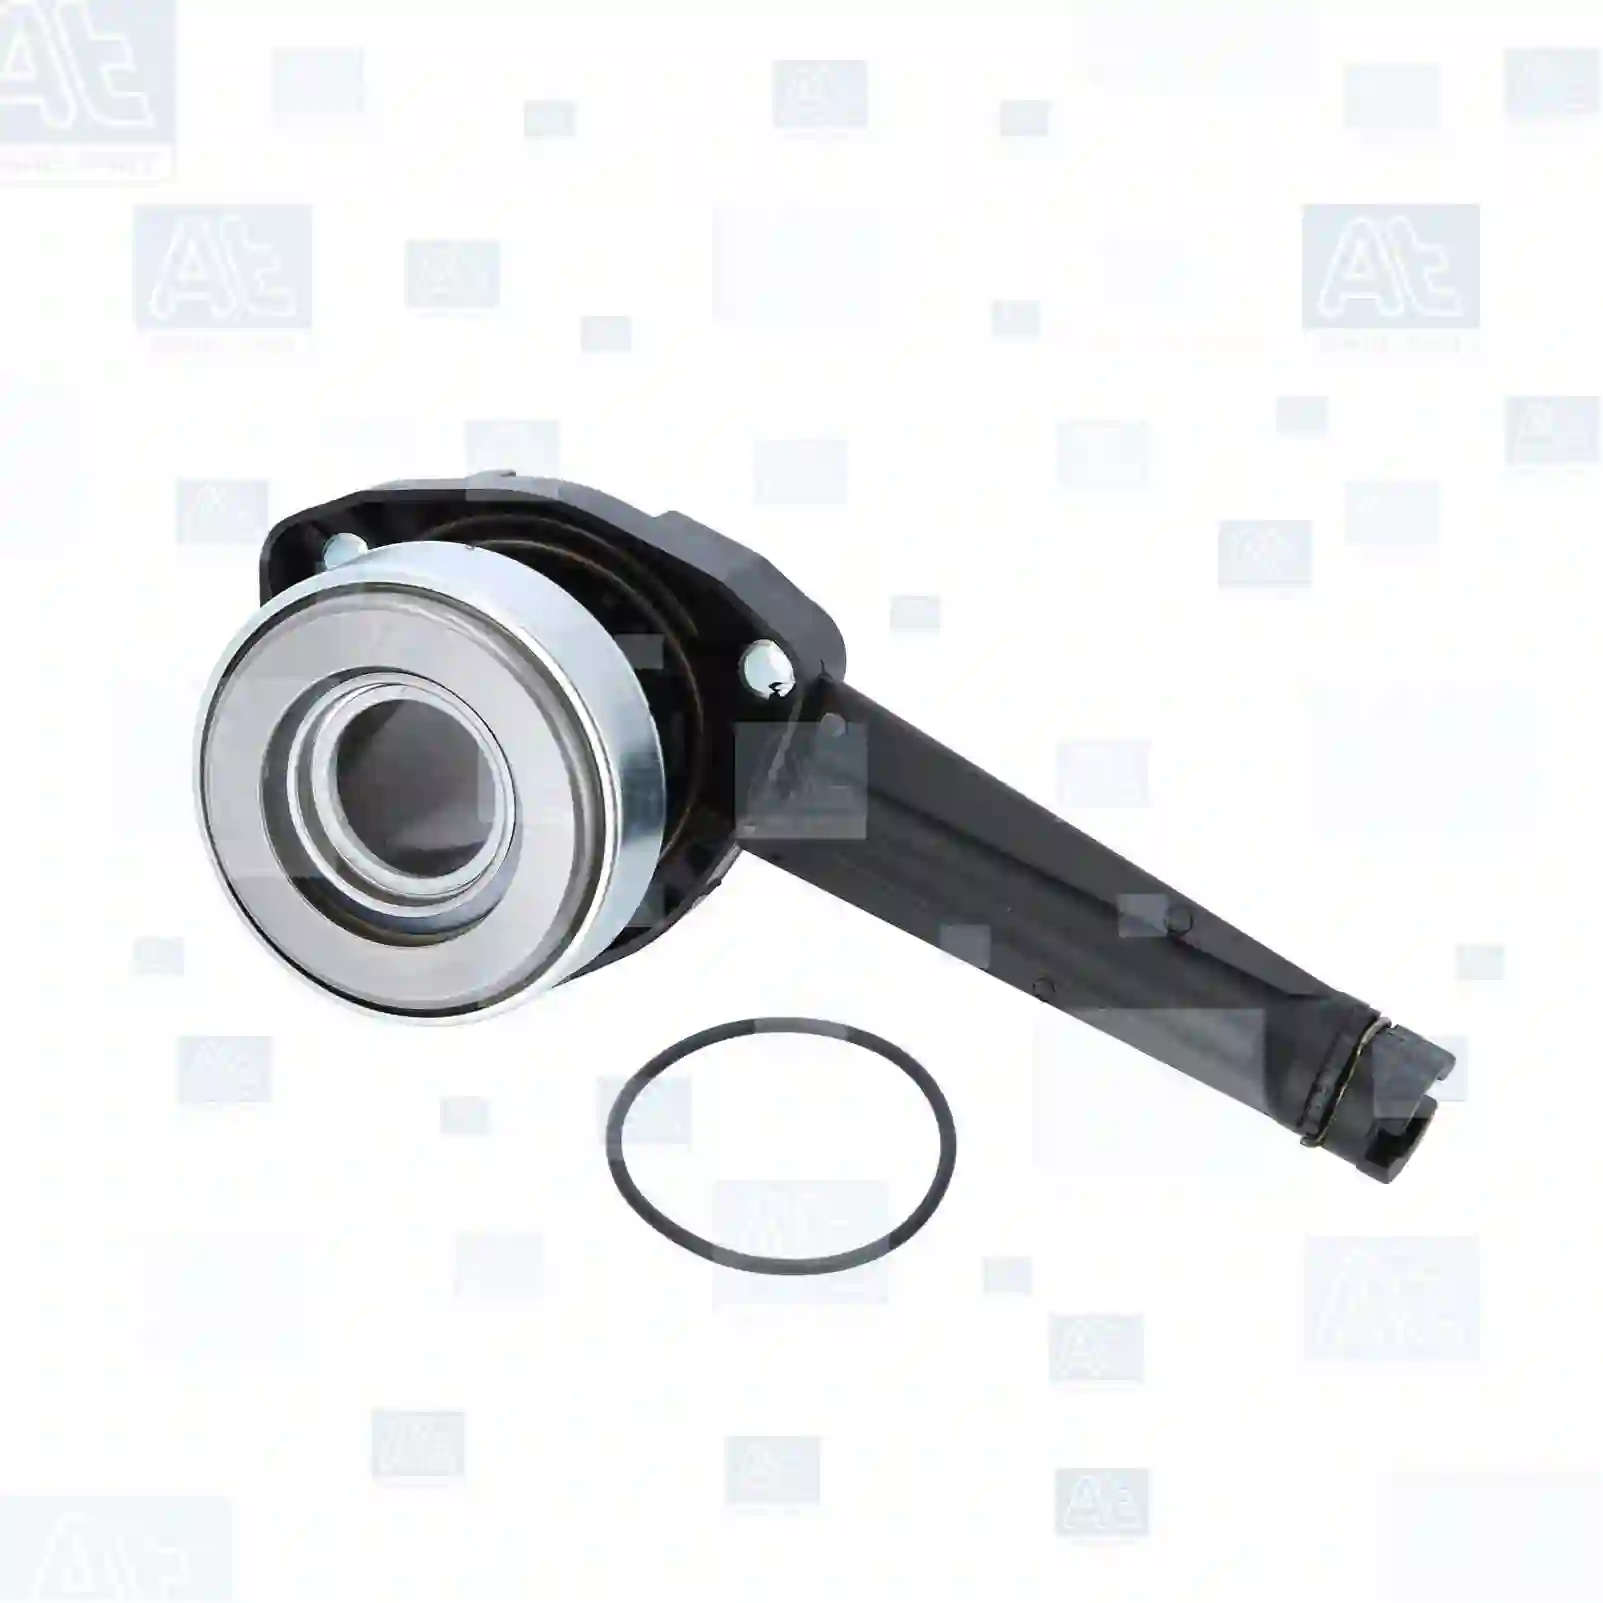 Release bearing, at no 77722877, oem no: 9110133, 9162581, 93160102, 93161282, 93161984, 93190872, 93198504, 30570-00Q0A, 30570-00Q0B, 30570-00Q0D, 30570-00Q0E, 30570-00Q0L, 30570-00Q0M, 30570-00Q1A, 30570-00Q1B, 30570-00QAA, 30570-00QAC, 30570-AAQ0D, 82001-24021, 82006-09202, 4402133, 4409897, 4413842, 4432436, 4435223, 4502299, 7700110348, 7700111632, 8200124021, 8200283479, 8200609202, 8200654810, 8200846748 At Spare Part | Engine, Accelerator Pedal, Camshaft, Connecting Rod, Crankcase, Crankshaft, Cylinder Head, Engine Suspension Mountings, Exhaust Manifold, Exhaust Gas Recirculation, Filter Kits, Flywheel Housing, General Overhaul Kits, Engine, Intake Manifold, Oil Cleaner, Oil Cooler, Oil Filter, Oil Pump, Oil Sump, Piston & Liner, Sensor & Switch, Timing Case, Turbocharger, Cooling System, Belt Tensioner, Coolant Filter, Coolant Pipe, Corrosion Prevention Agent, Drive, Expansion Tank, Fan, Intercooler, Monitors & Gauges, Radiator, Thermostat, V-Belt / Timing belt, Water Pump, Fuel System, Electronical Injector Unit, Feed Pump, Fuel Filter, cpl., Fuel Gauge Sender,  Fuel Line, Fuel Pump, Fuel Tank, Injection Line Kit, Injection Pump, Exhaust System, Clutch & Pedal, Gearbox, Propeller Shaft, Axles, Brake System, Hubs & Wheels, Suspension, Leaf Spring, Universal Parts / Accessories, Steering, Electrical System, Cabin Release bearing, at no 77722877, oem no: 9110133, 9162581, 93160102, 93161282, 93161984, 93190872, 93198504, 30570-00Q0A, 30570-00Q0B, 30570-00Q0D, 30570-00Q0E, 30570-00Q0L, 30570-00Q0M, 30570-00Q1A, 30570-00Q1B, 30570-00QAA, 30570-00QAC, 30570-AAQ0D, 82001-24021, 82006-09202, 4402133, 4409897, 4413842, 4432436, 4435223, 4502299, 7700110348, 7700111632, 8200124021, 8200283479, 8200609202, 8200654810, 8200846748 At Spare Part | Engine, Accelerator Pedal, Camshaft, Connecting Rod, Crankcase, Crankshaft, Cylinder Head, Engine Suspension Mountings, Exhaust Manifold, Exhaust Gas Recirculation, Filter Kits, Flywheel Housing, General Overhaul Kits, Engine, Intake Manifold, Oil Cleaner, Oil Cooler, Oil Filter, Oil Pump, Oil Sump, Piston & Liner, Sensor & Switch, Timing Case, Turbocharger, Cooling System, Belt Tensioner, Coolant Filter, Coolant Pipe, Corrosion Prevention Agent, Drive, Expansion Tank, Fan, Intercooler, Monitors & Gauges, Radiator, Thermostat, V-Belt / Timing belt, Water Pump, Fuel System, Electronical Injector Unit, Feed Pump, Fuel Filter, cpl., Fuel Gauge Sender,  Fuel Line, Fuel Pump, Fuel Tank, Injection Line Kit, Injection Pump, Exhaust System, Clutch & Pedal, Gearbox, Propeller Shaft, Axles, Brake System, Hubs & Wheels, Suspension, Leaf Spring, Universal Parts / Accessories, Steering, Electrical System, Cabin